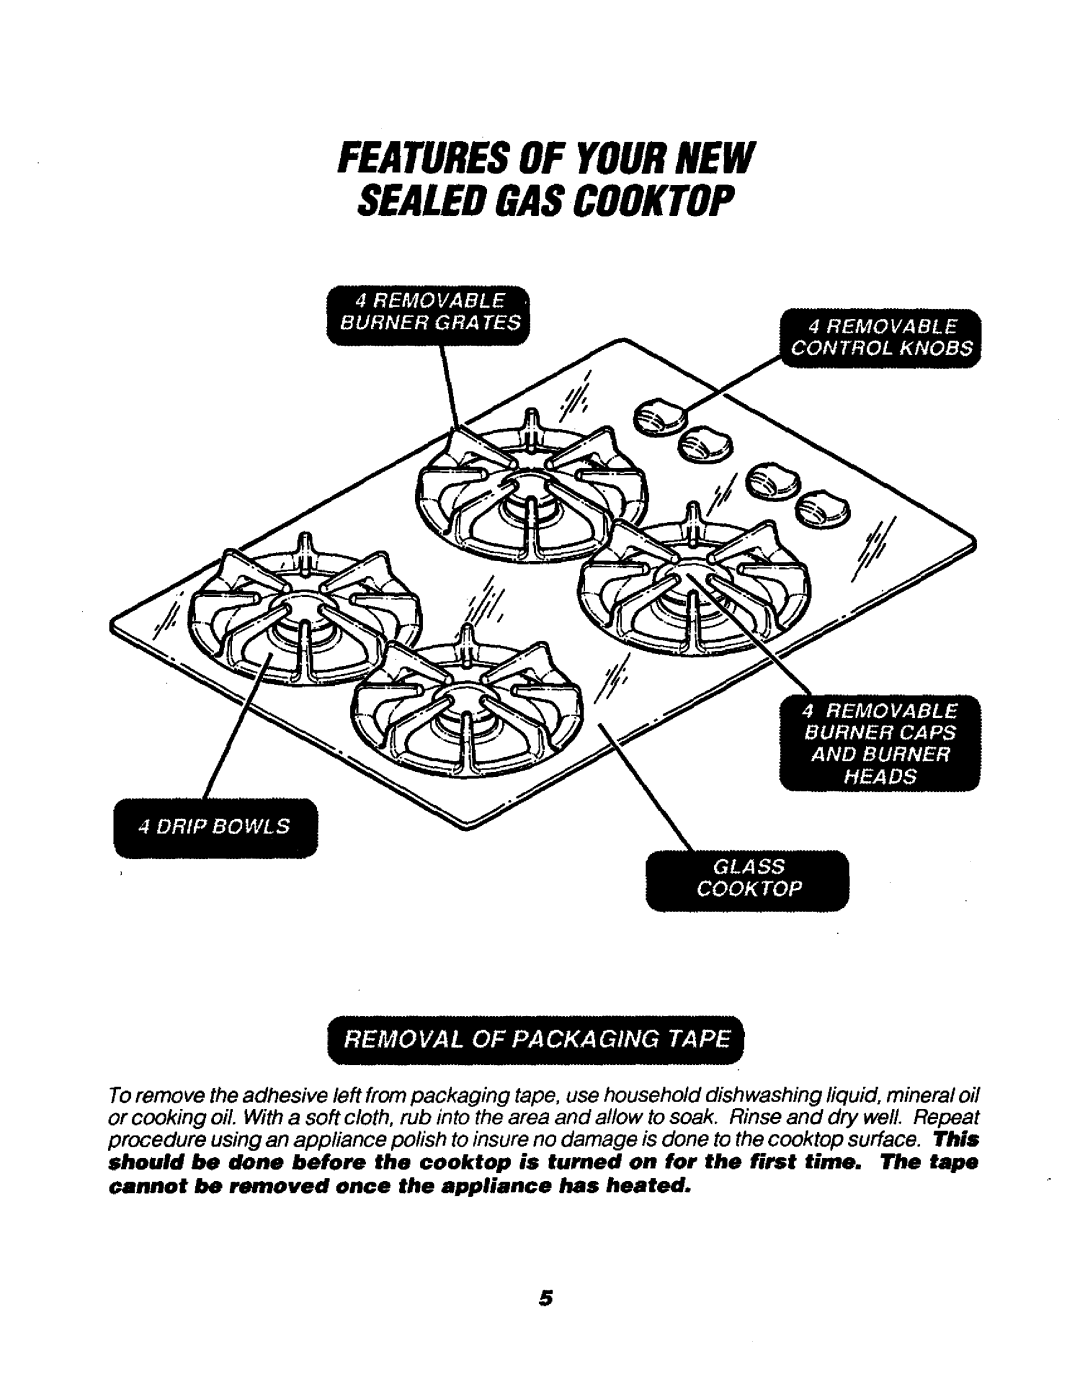 Sears 911.3235S, 911.32359 owner manual Featuresof Yournew Sealedgascooktop, cannot be removed once the appliance has heated 